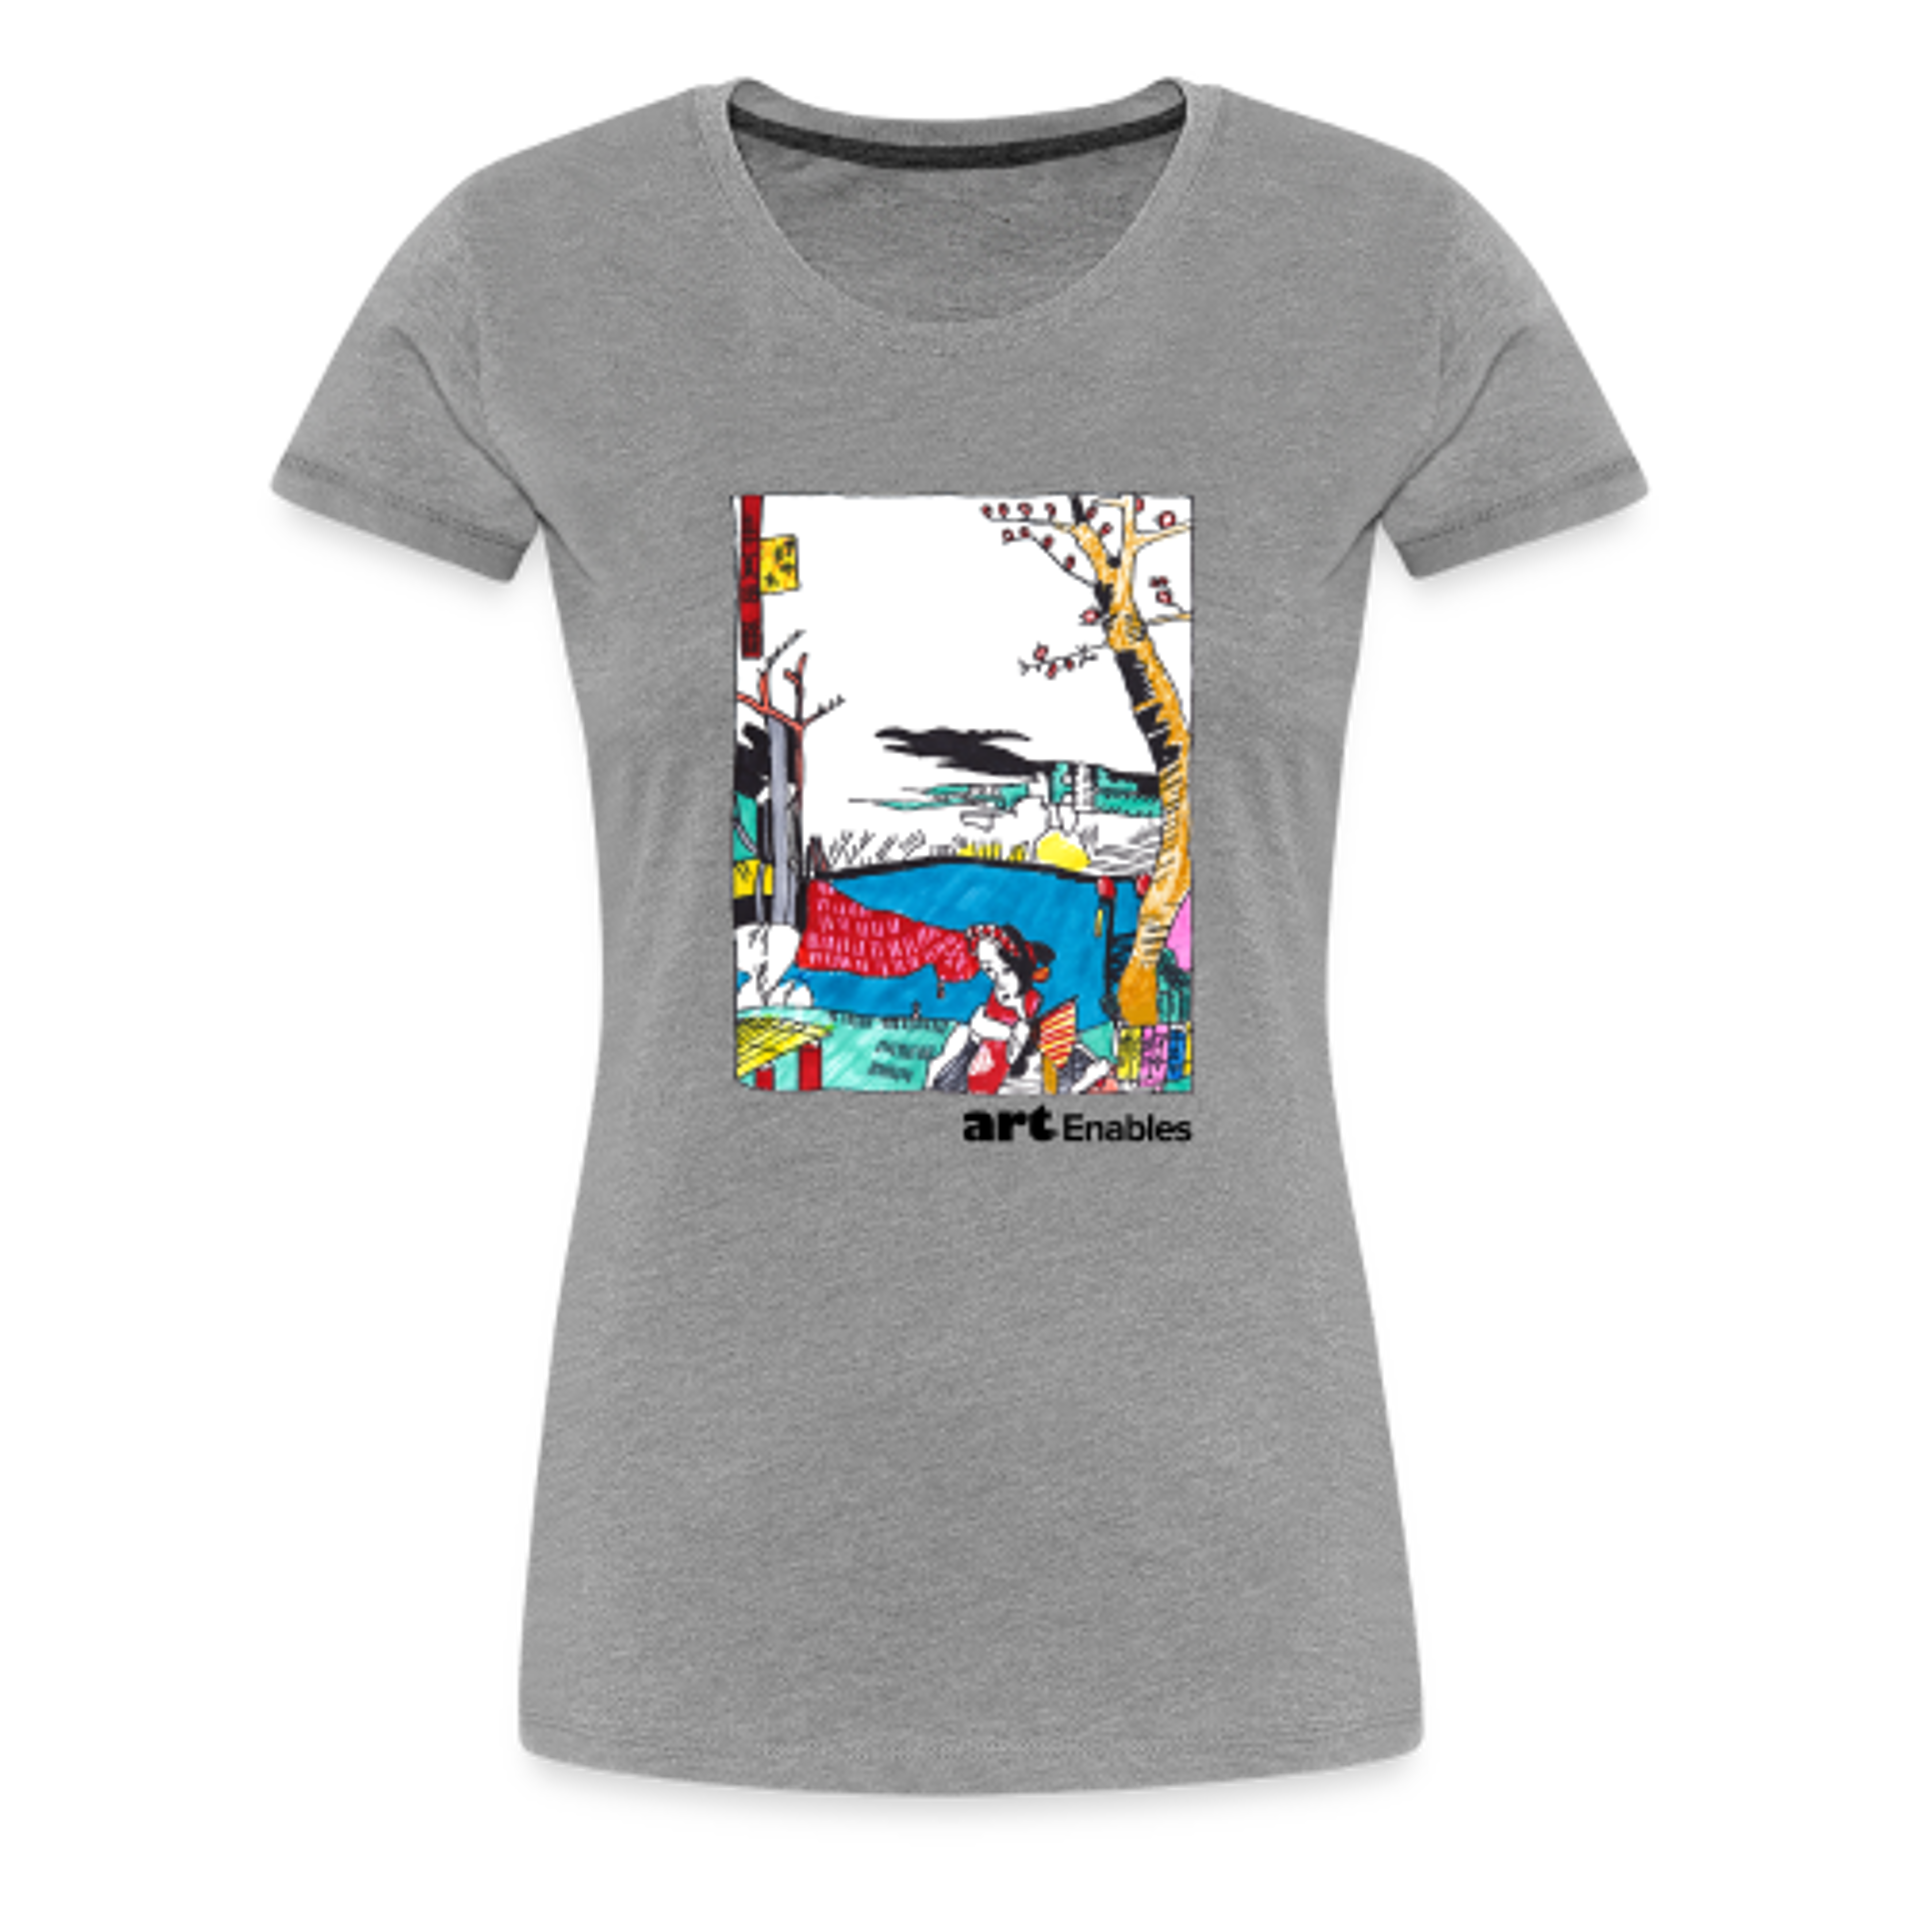 Women's T-shirt (artwork by Charles Meissner) Small - heather gray by Art Enables Merchandise